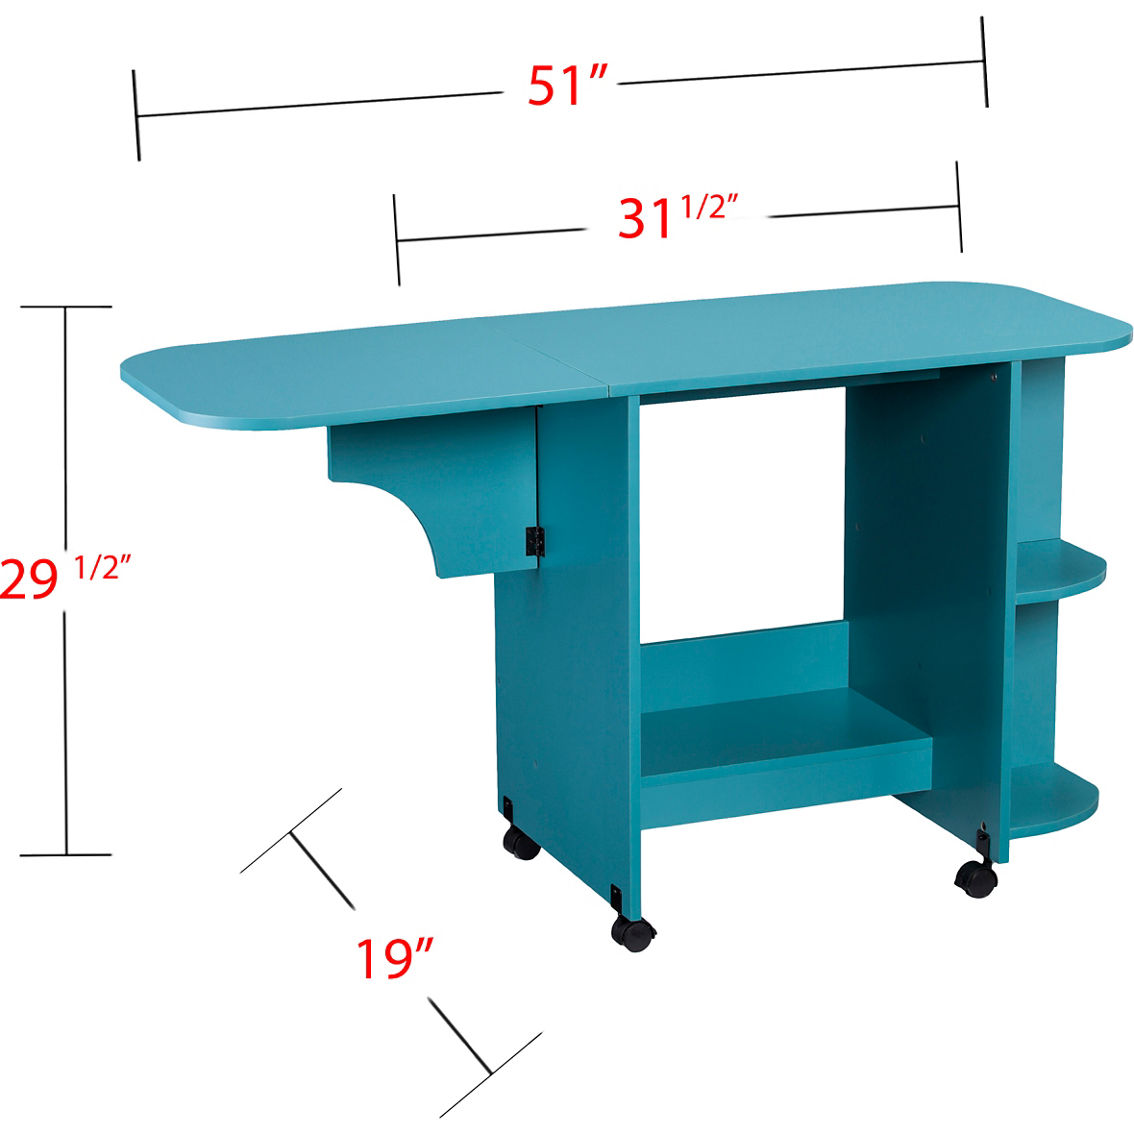 SEI Furniture Stradville Expandable Rolling Sewing Table Craft Station - Image 4 of 4